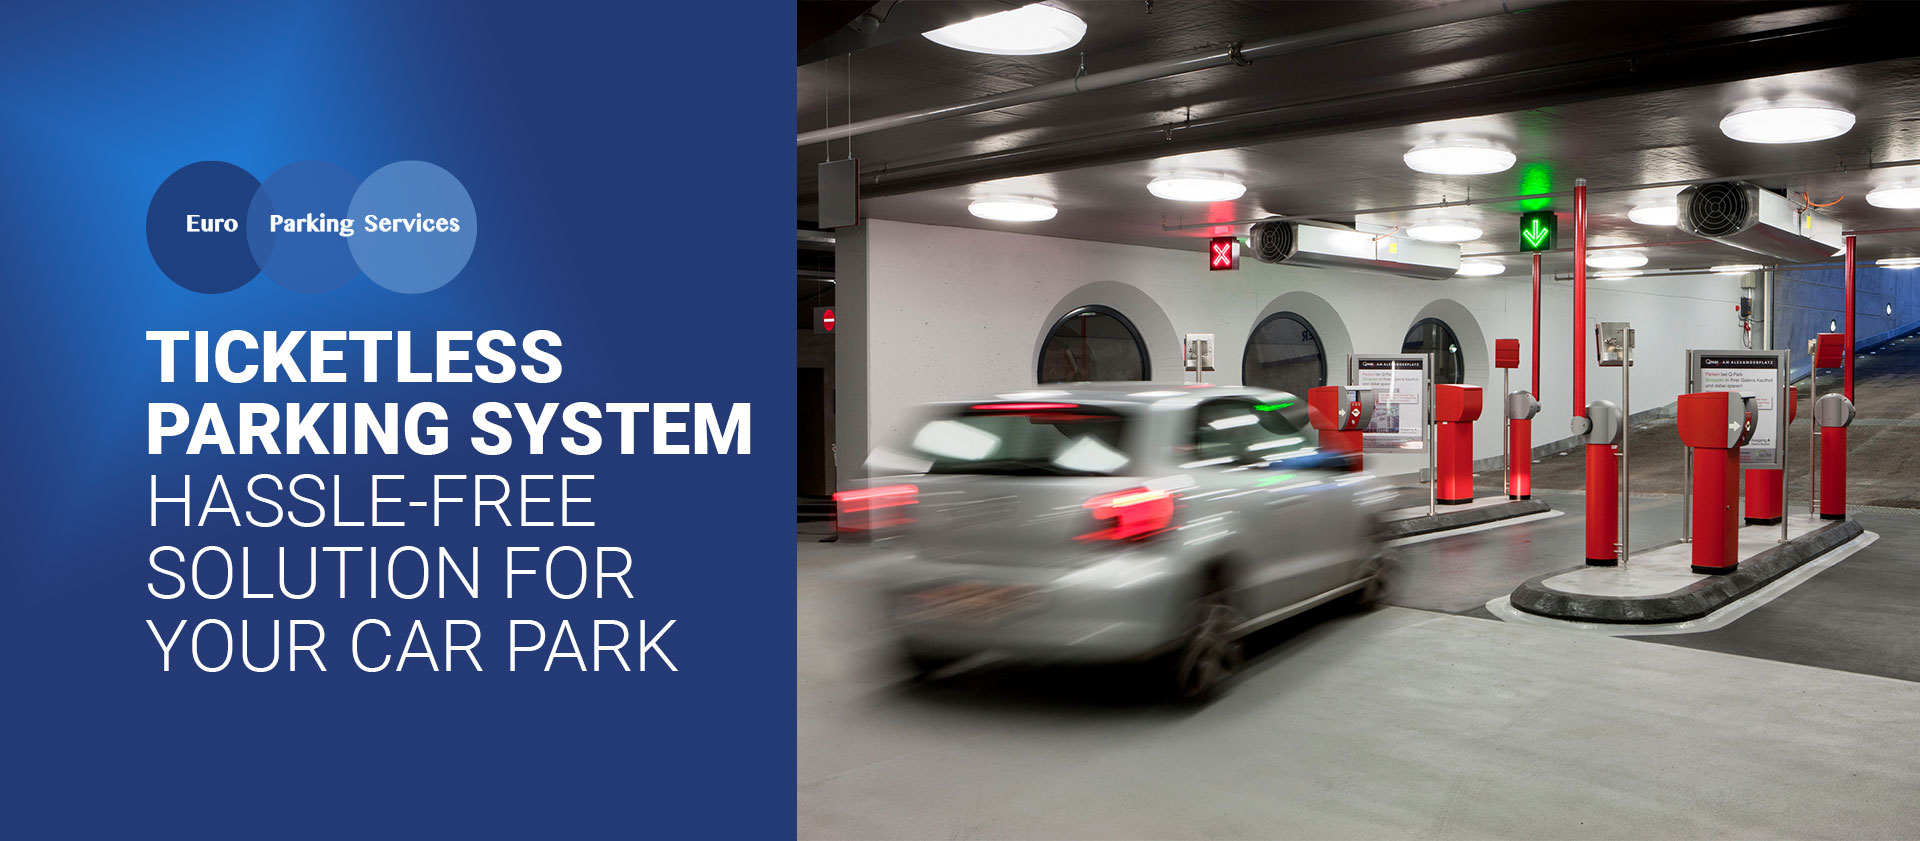 Ticketless Parking System Hassle-free solution for your car park